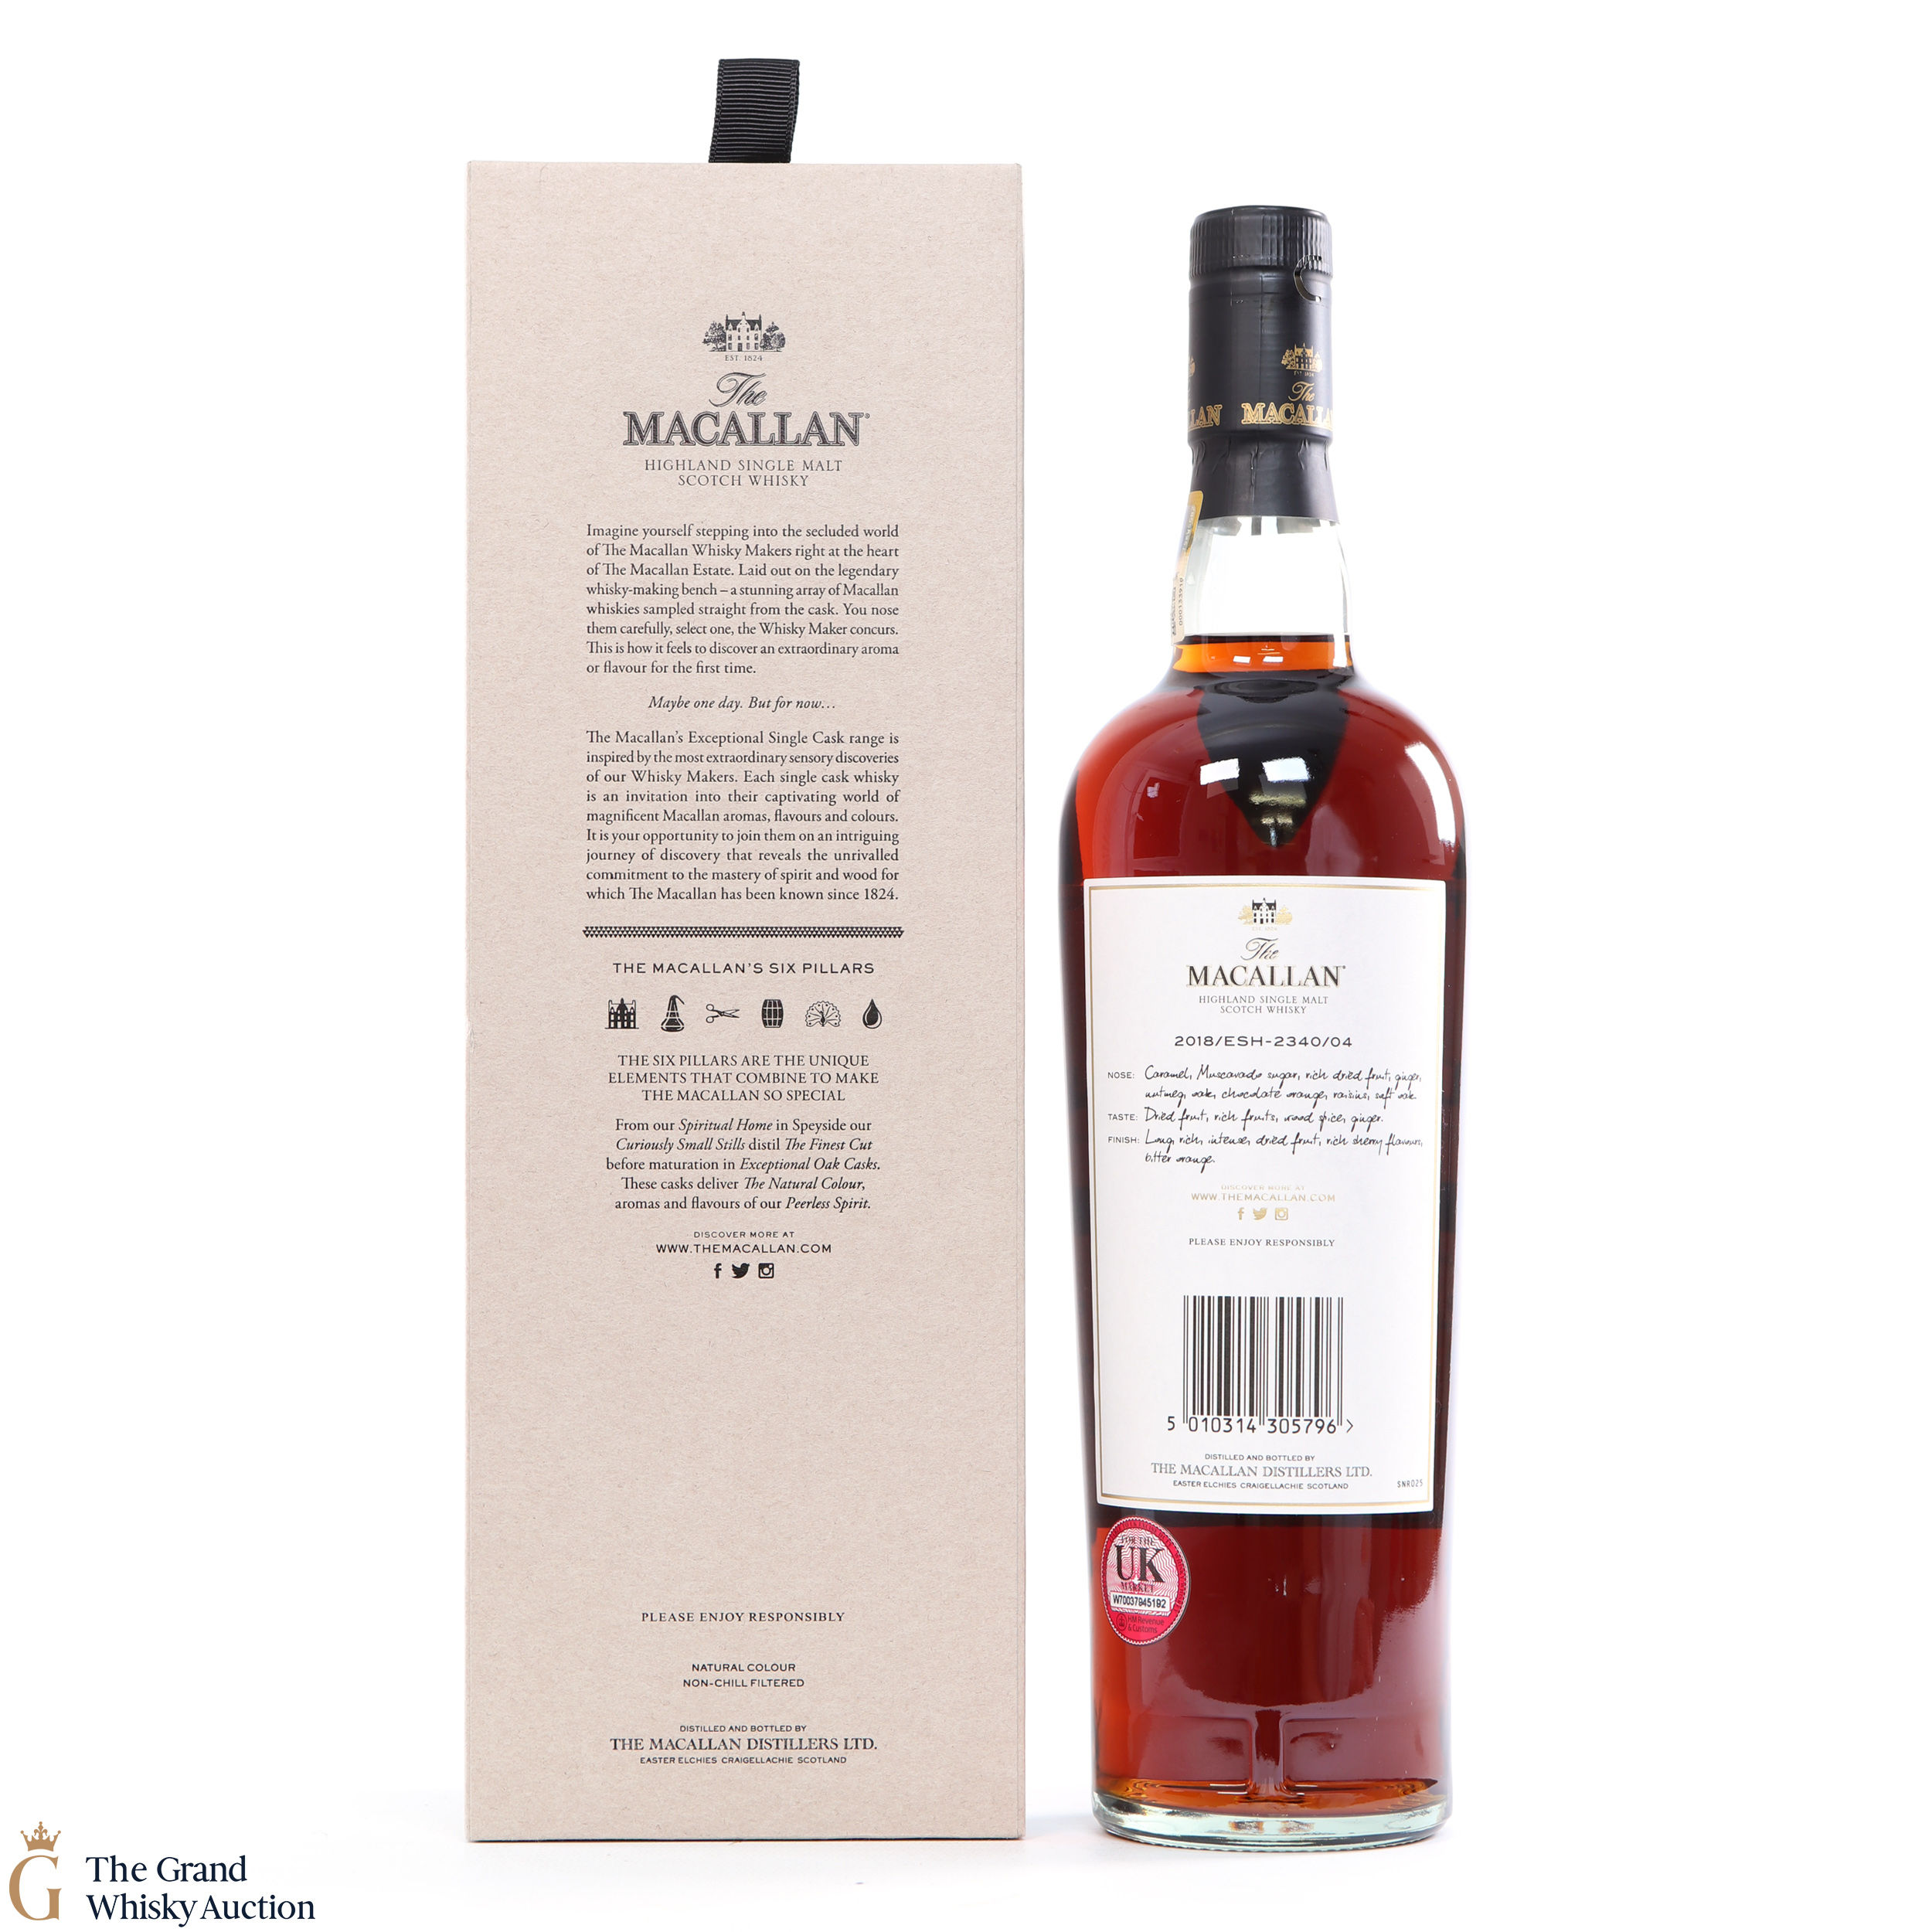 Macallan 2002 Exceptional Cask 2340 04 2018 Auction The Grand Whisky Auction